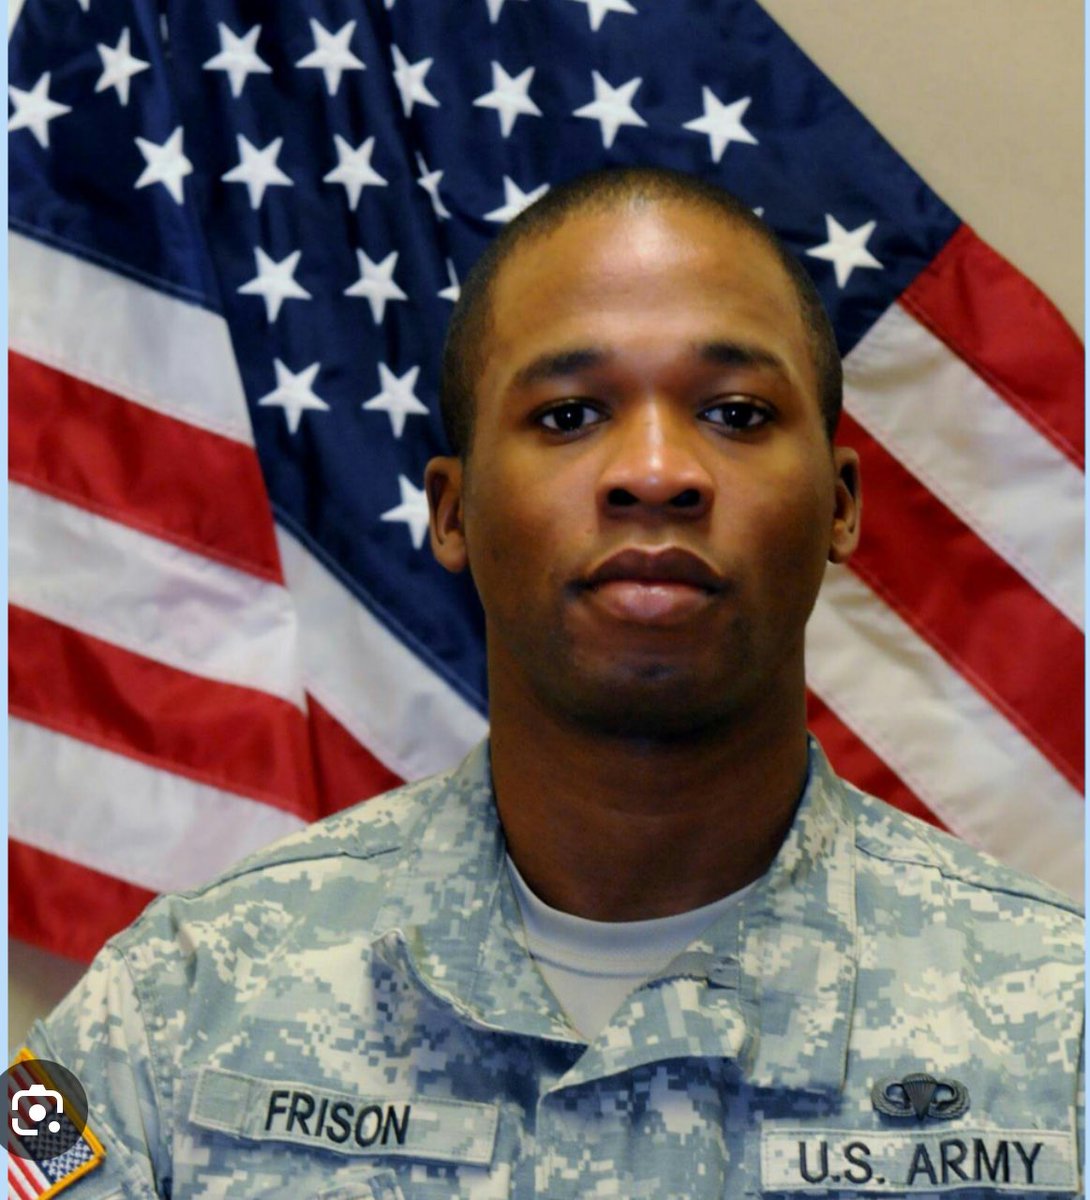 #memorialday First Lieutenant Demetrius Frison: Just one of too many🙏🏾💔 WE HONOR YOU!…sending love to ALL of the families missing a hero today 🇺🇸 🇺🇸🇺🇸 #selfless #ultimatesacrifice #DemetriusFrison #thankyouforyourservice